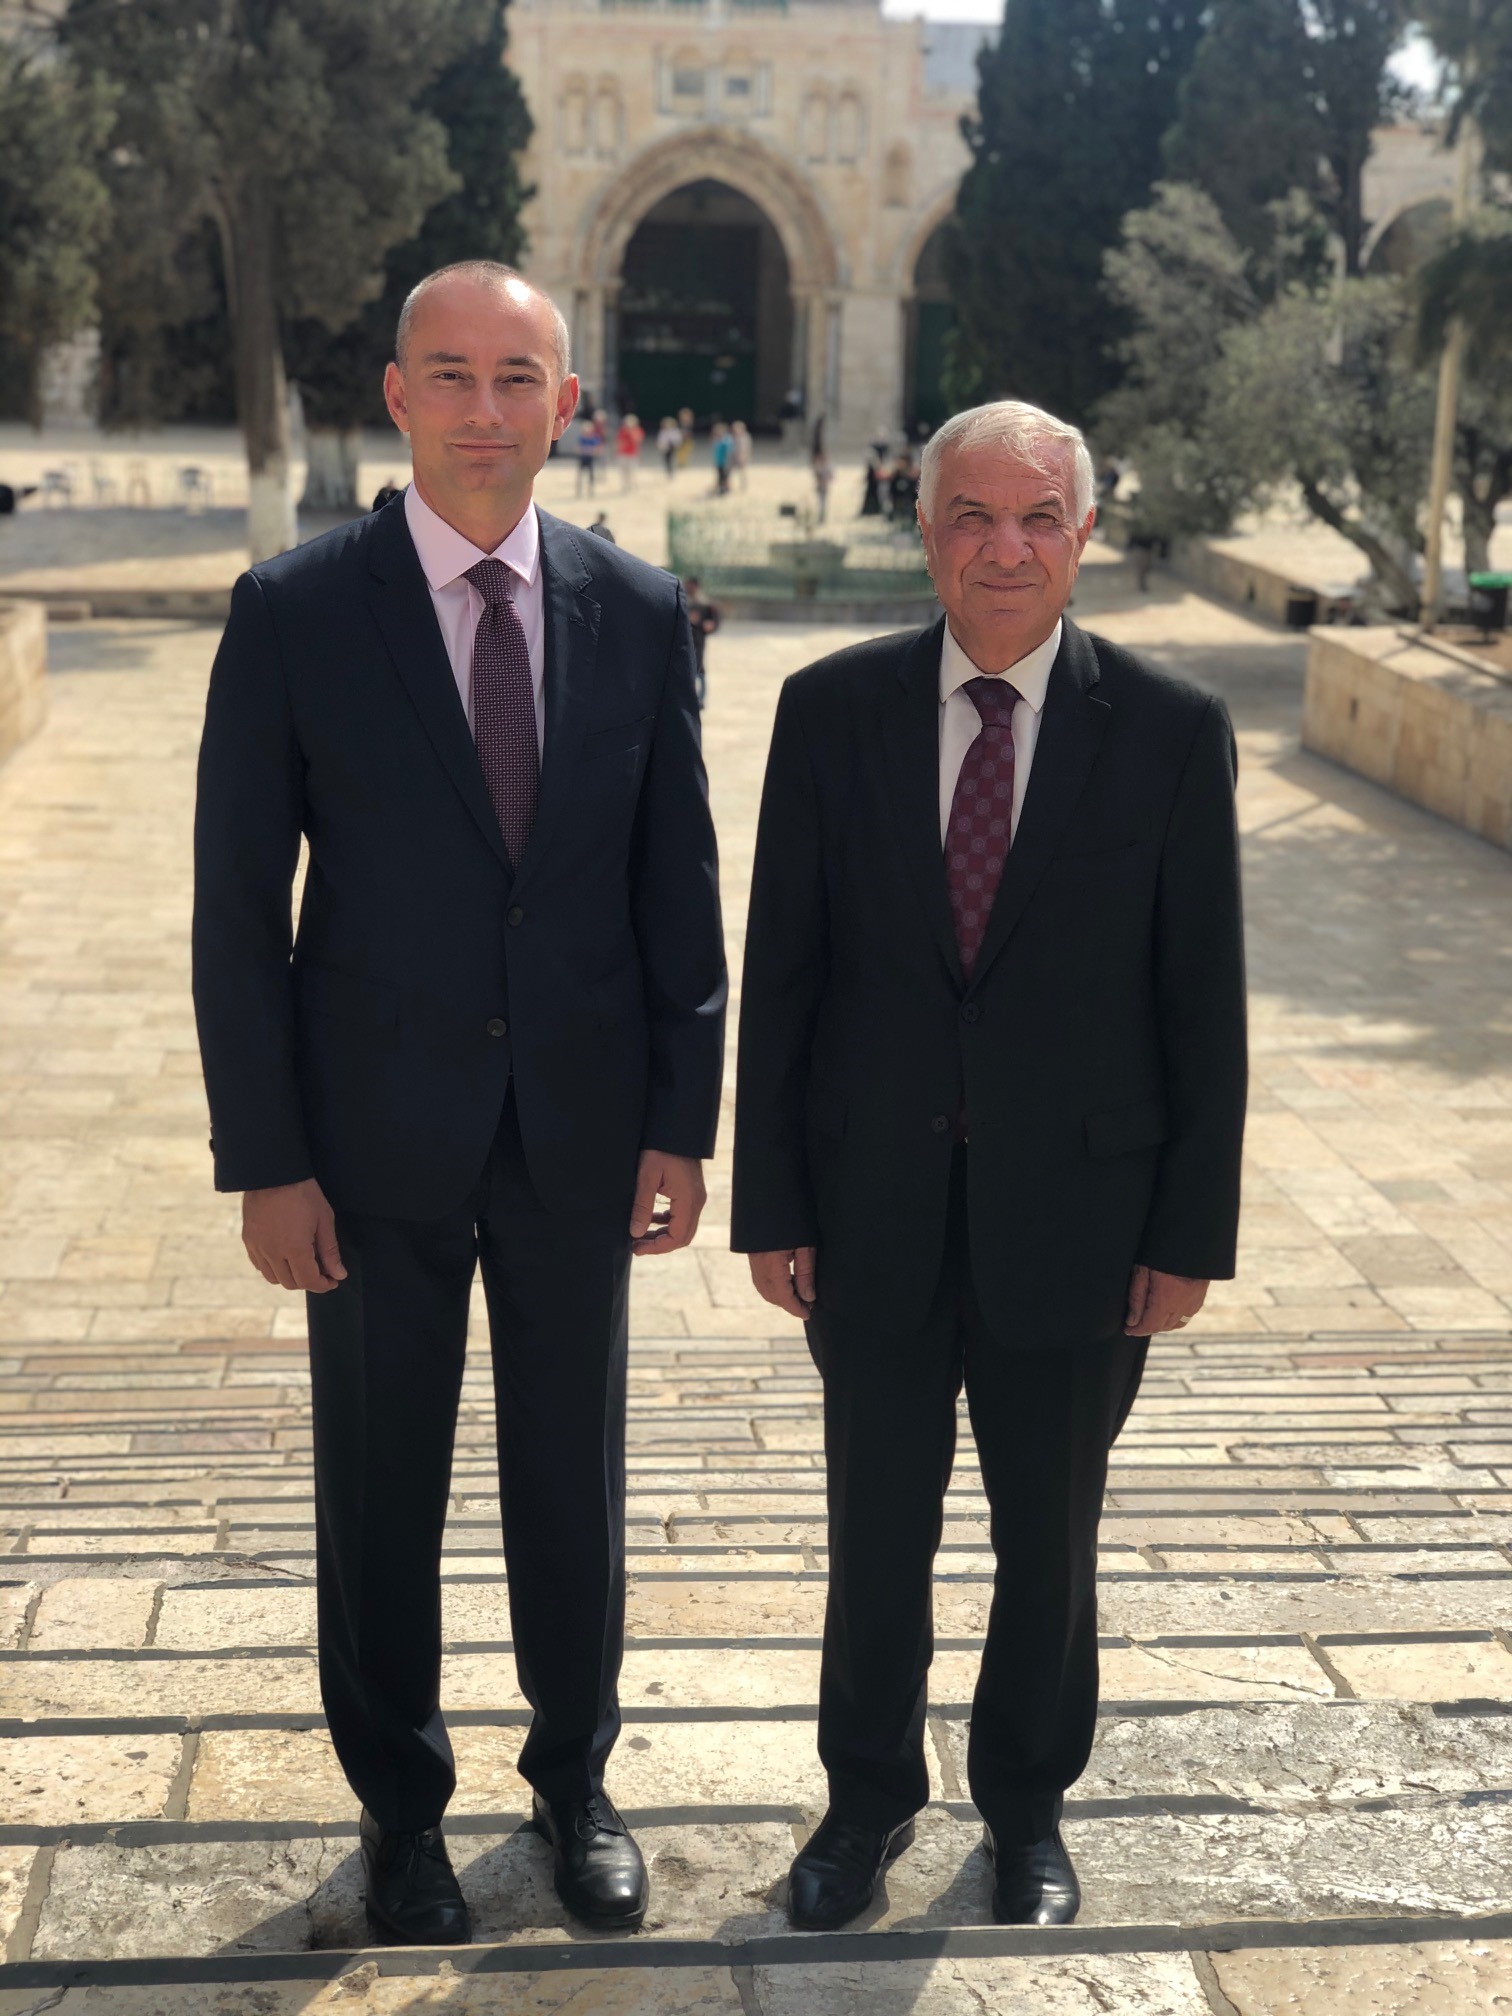 United Nations Special Coordinator, Nickolay Mladenov meets with the Director of Jerusalem Waqf Department, Sheikh Azzam Al-Khatib